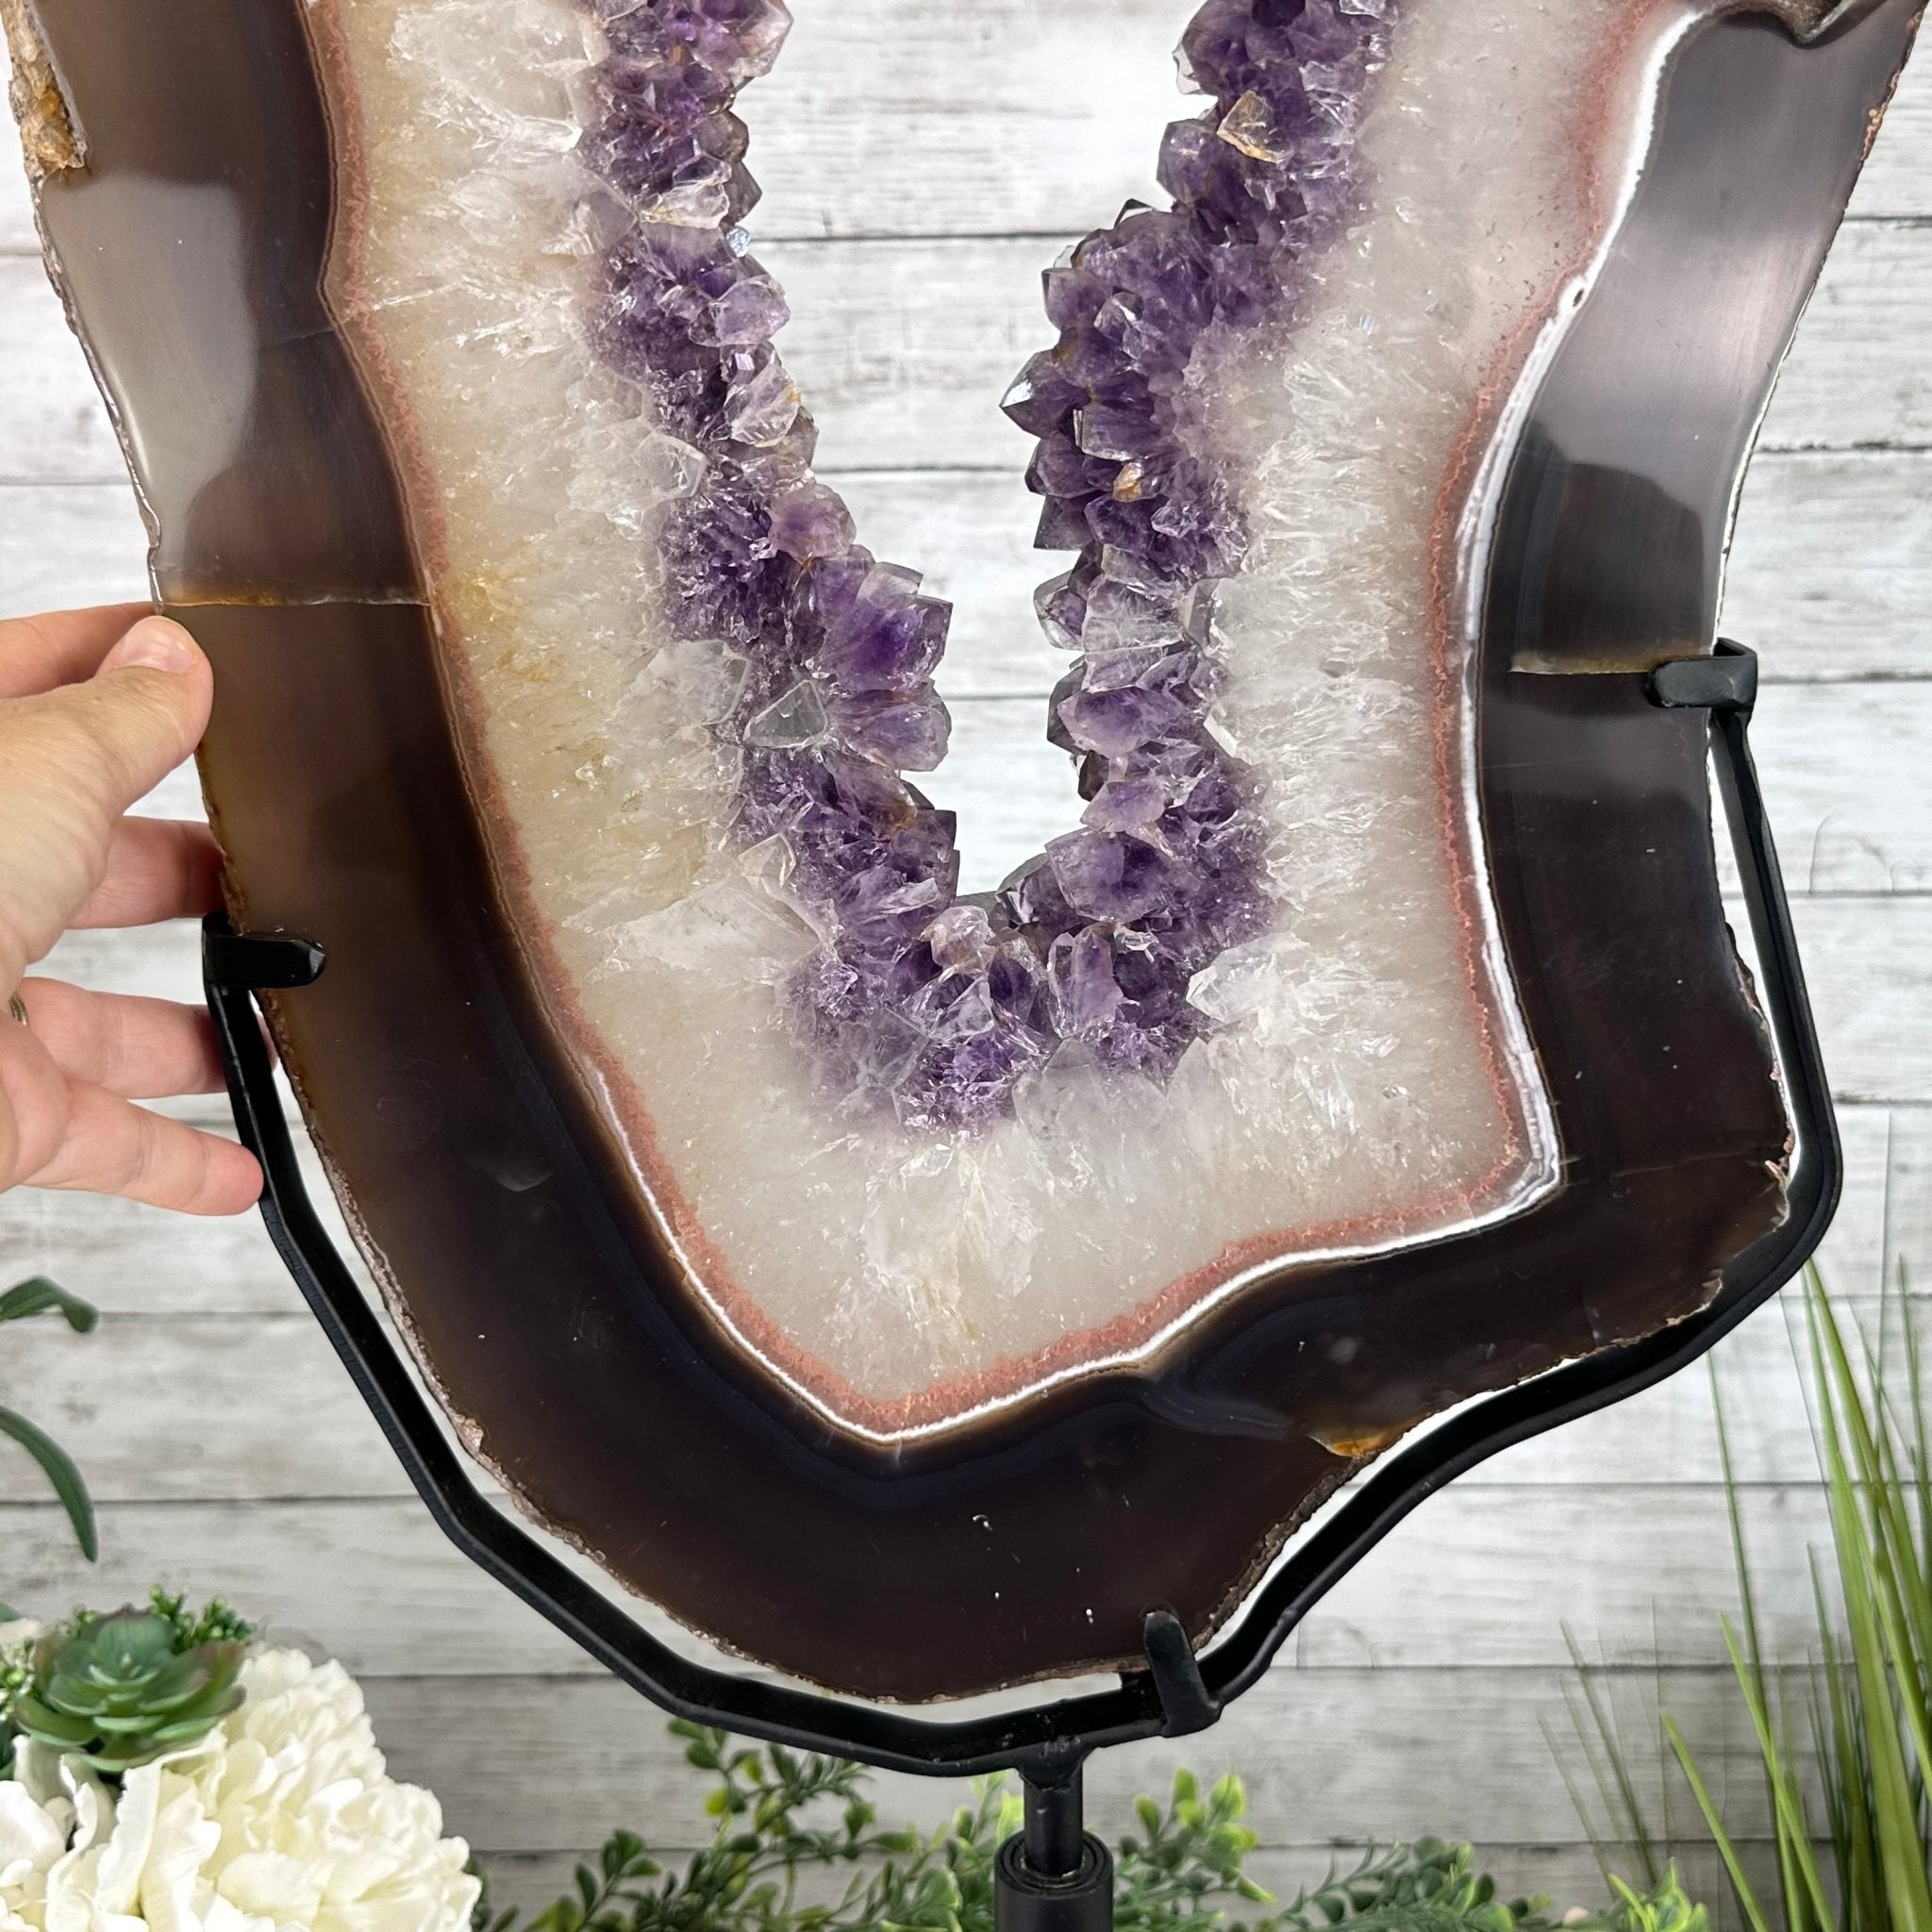 Extra Plus Quality Brazilian Amethyst Crystal Portal on a Rotating Stand, 21.1 lbs & 31" tall Model #5604-0127 by Brazil Gems - Brazil GemsBrazil GemsExtra Plus Quality Brazilian Amethyst Crystal Portal on a Rotating Stand, 21.1 lbs & 31" tall Model #5604-0127 by Brazil GemsPortals on Rotating Bases5604-0127